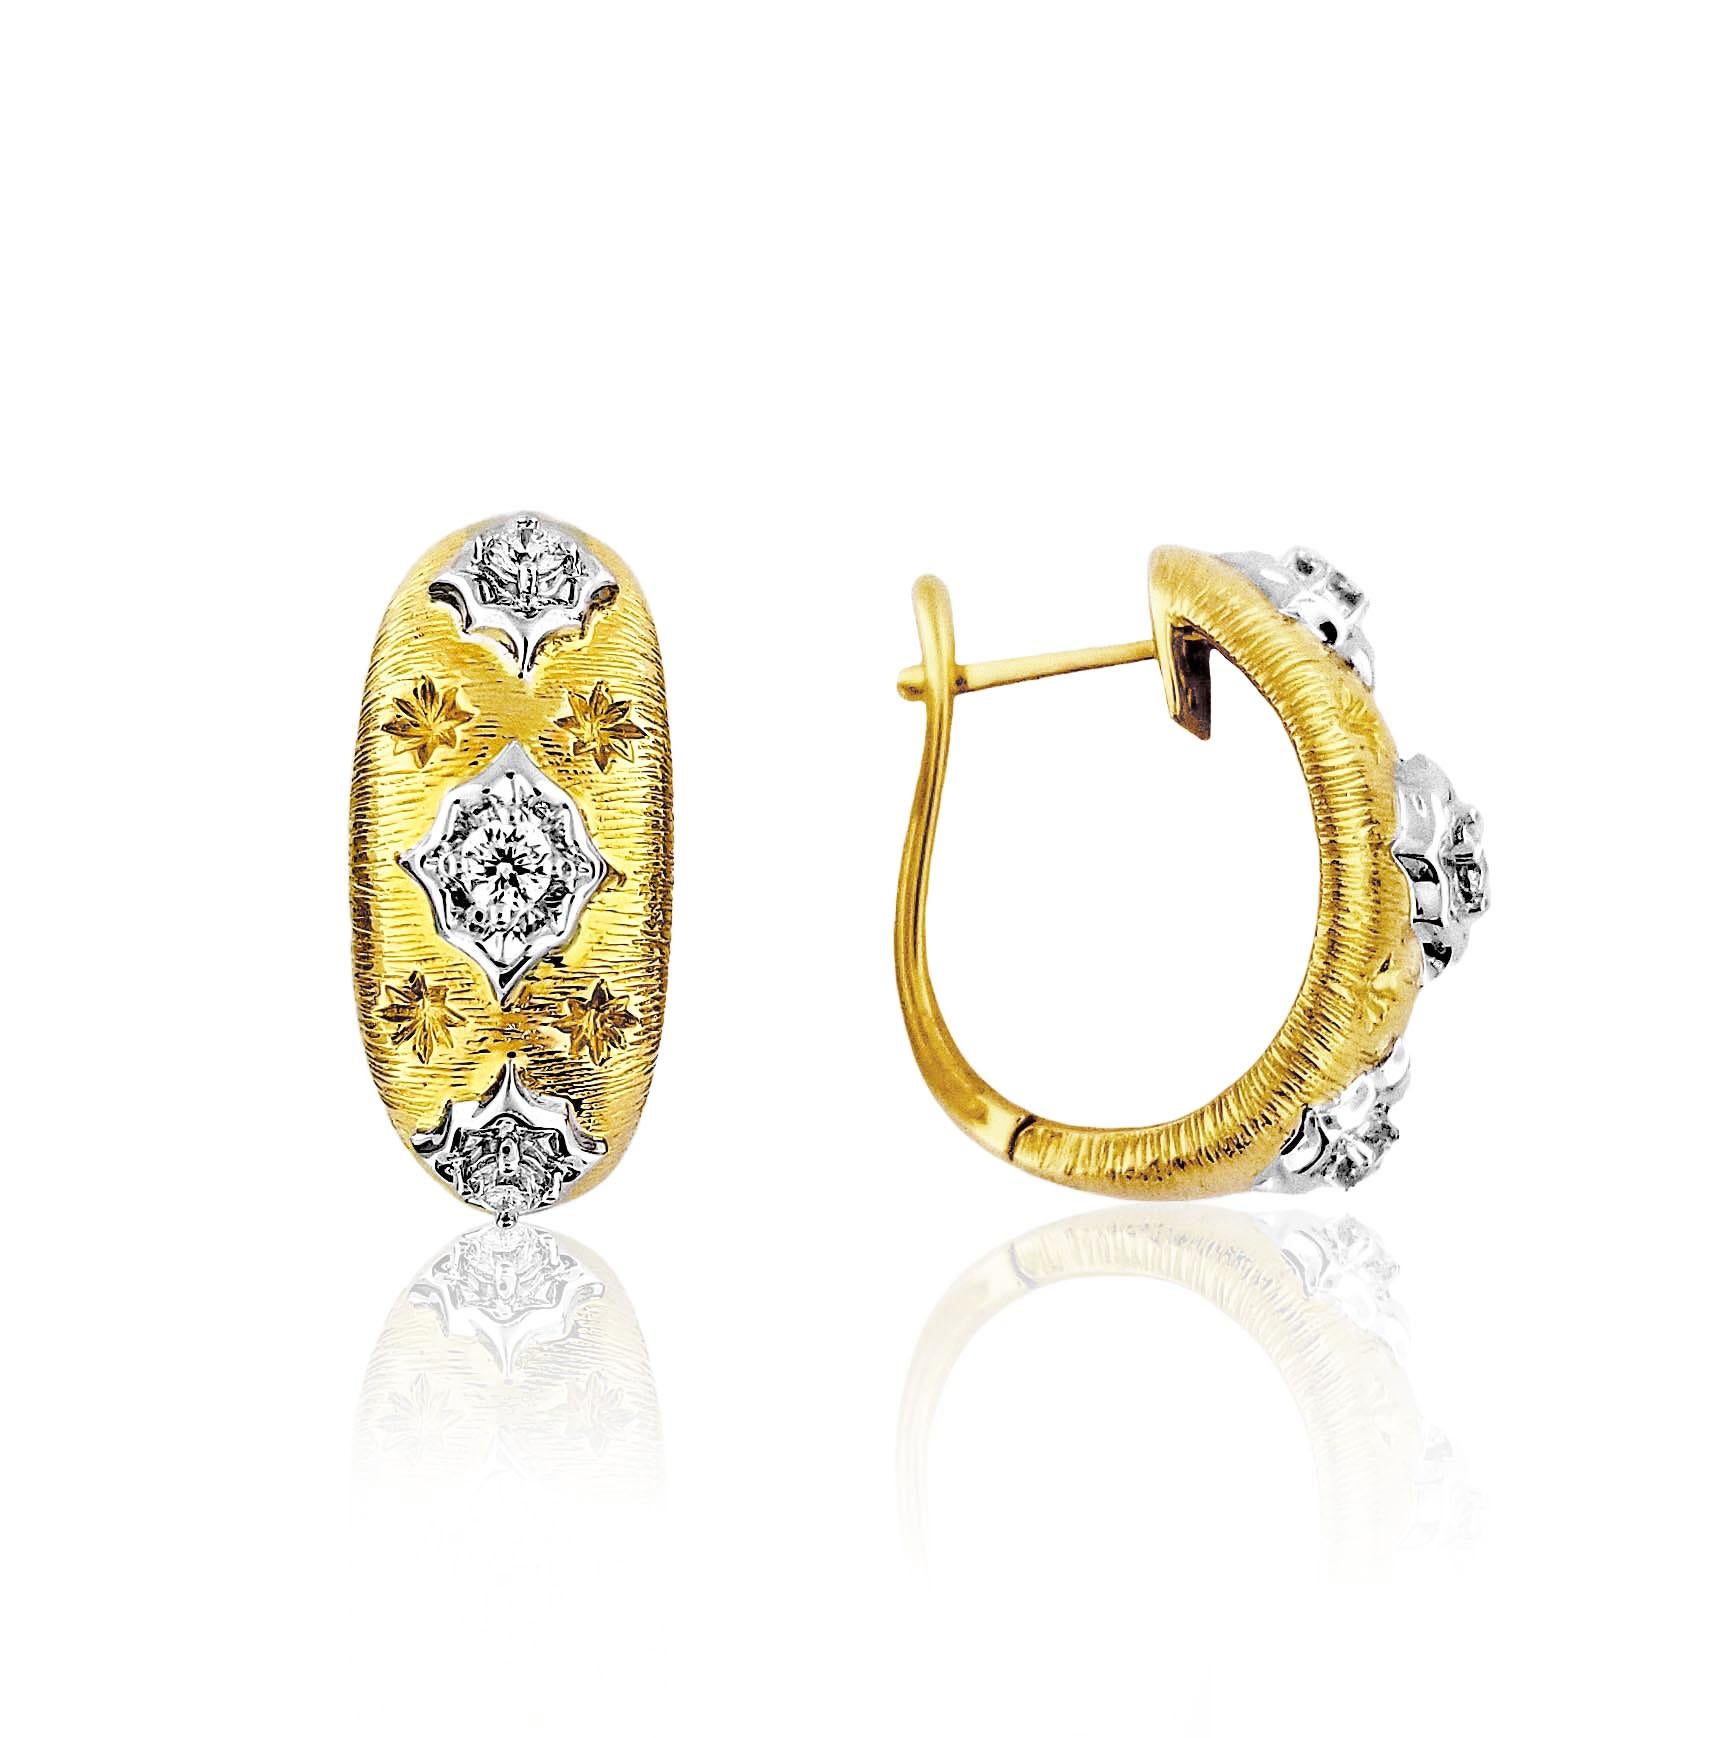 Produced by award winning Italian designer Stefano Vitolo. Stefano creates custom artisanal one of a kind jewelry with excellent gemstones in a truly old world Italian craftmanship.
These handcrafted earring have 0.22 total carat weight of F/G